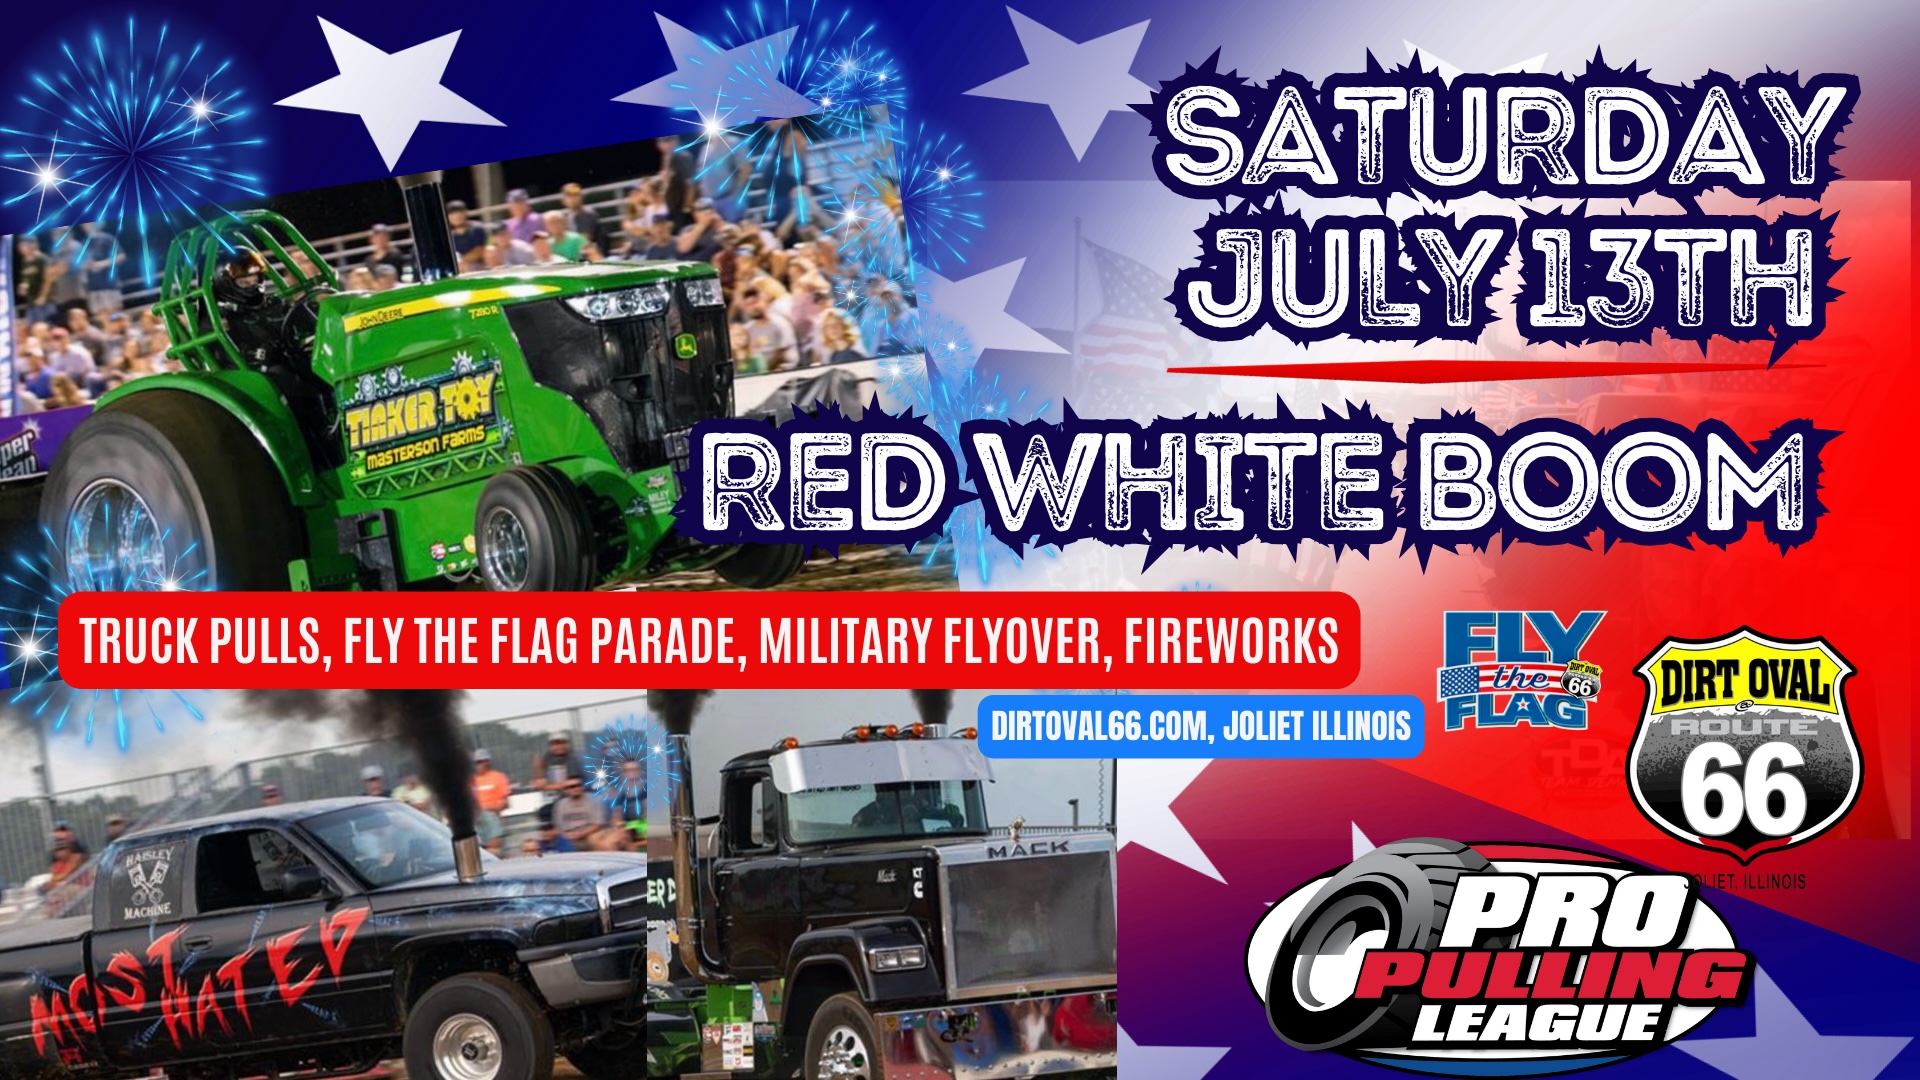 RED WHITE BOOM! Truck Pulls, Fly the Flag Parade, Military Flyover & Fireworks!